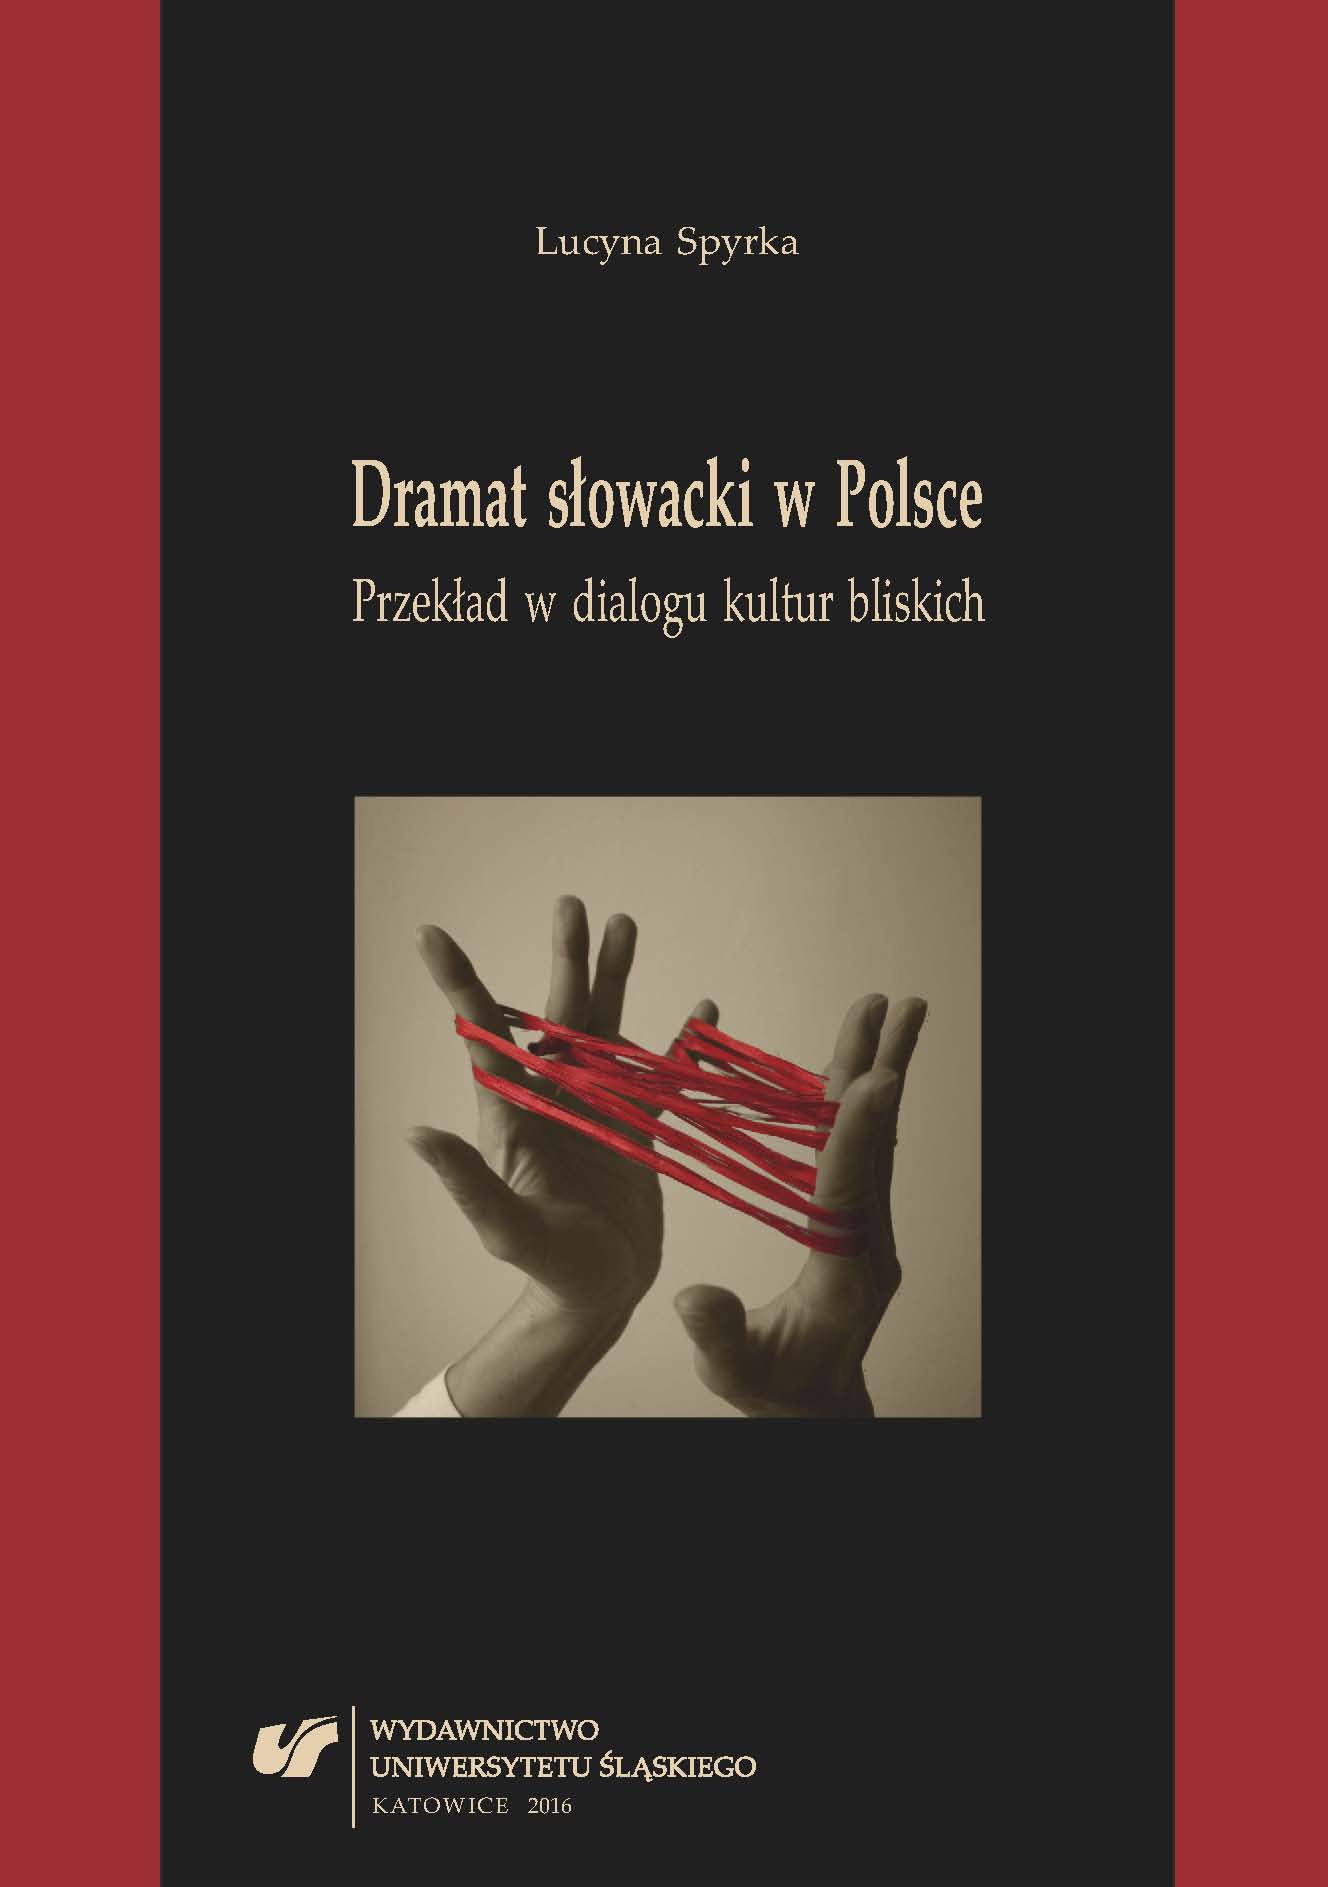 Slovak drama in Poland. Translation in the dialogue of proximate cultures